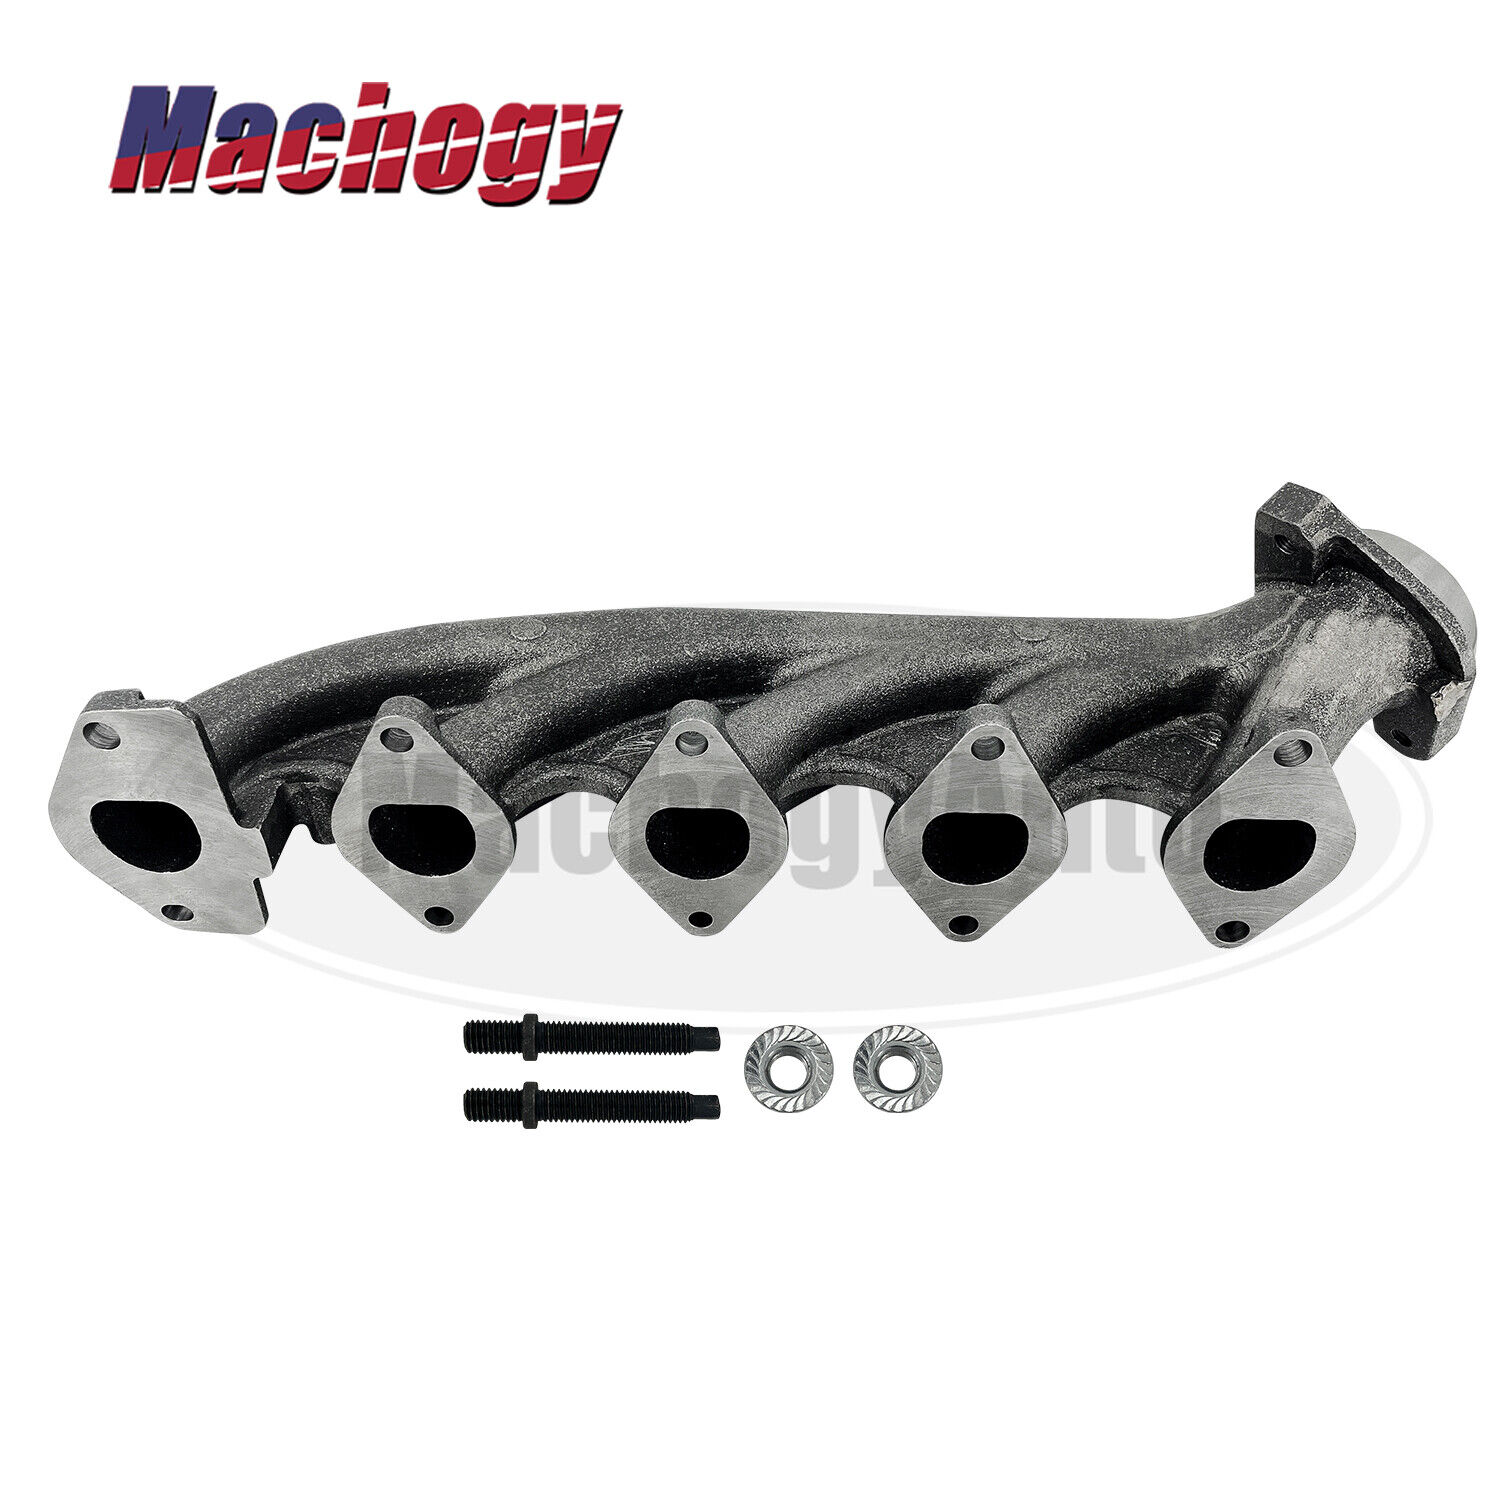 Left Exhaust Manifold Driver Side For 2005-10 Ford F250 Super Duty Pickup 6.8L